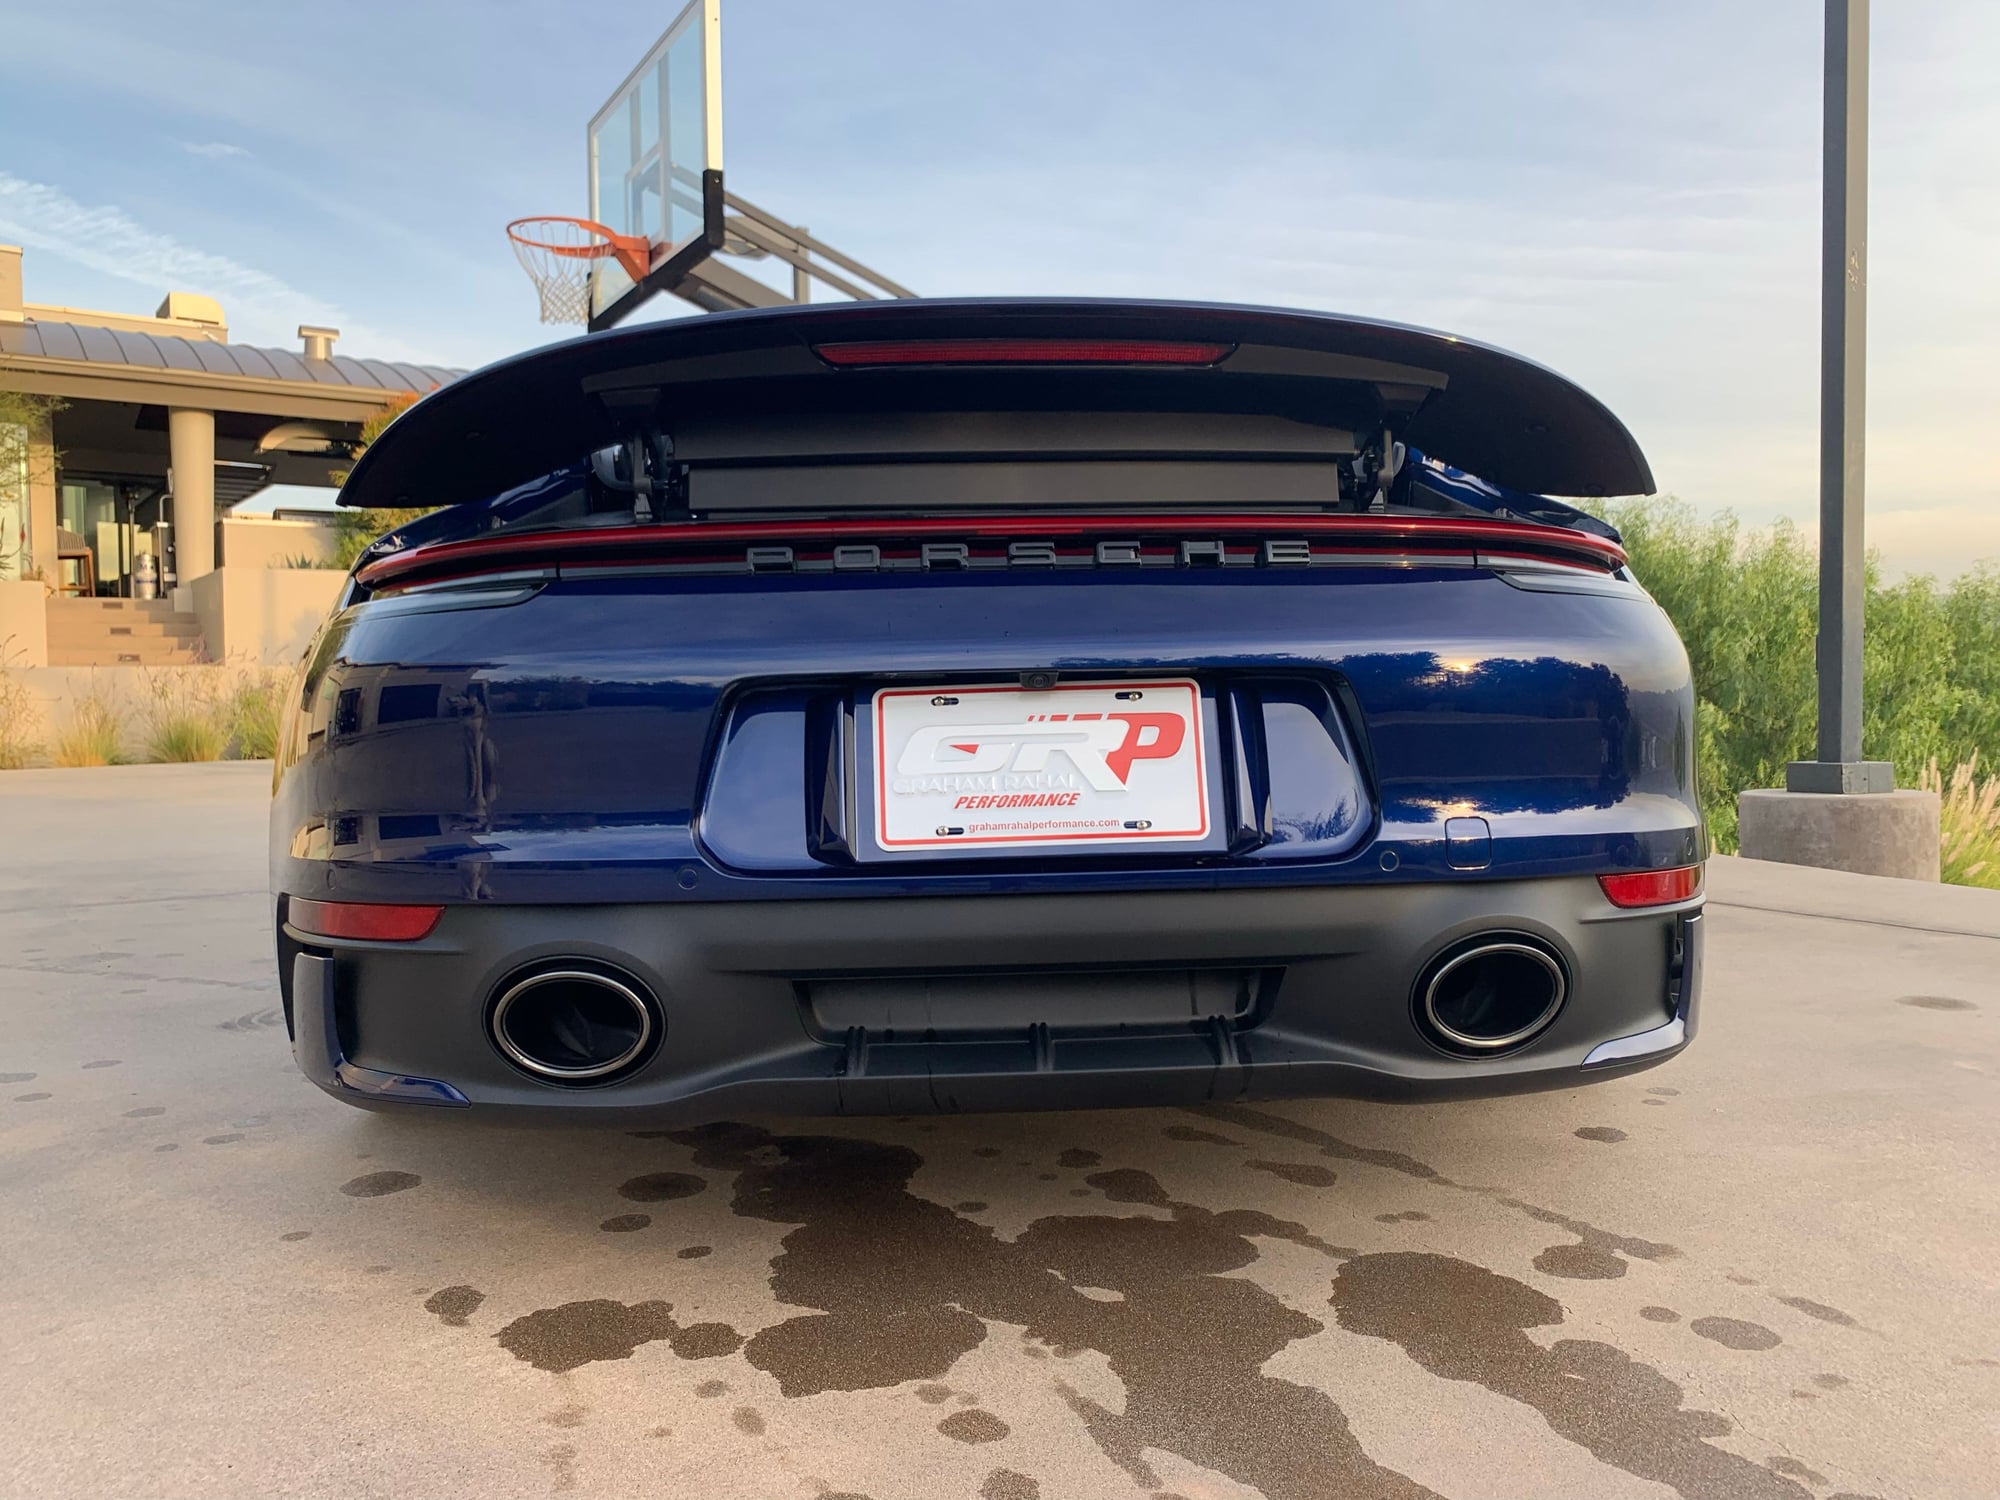 2020 Porsche 911 - 992 C4S Gentian Blue / Slate Grey STUNNING AND LOADED!!!! - Used - VIN WP0AB2A96LS227290 - 780 Miles - 6 cyl - 4WD - Automatic - Coupe - Blue - Indianapolis, IN 46112, United States